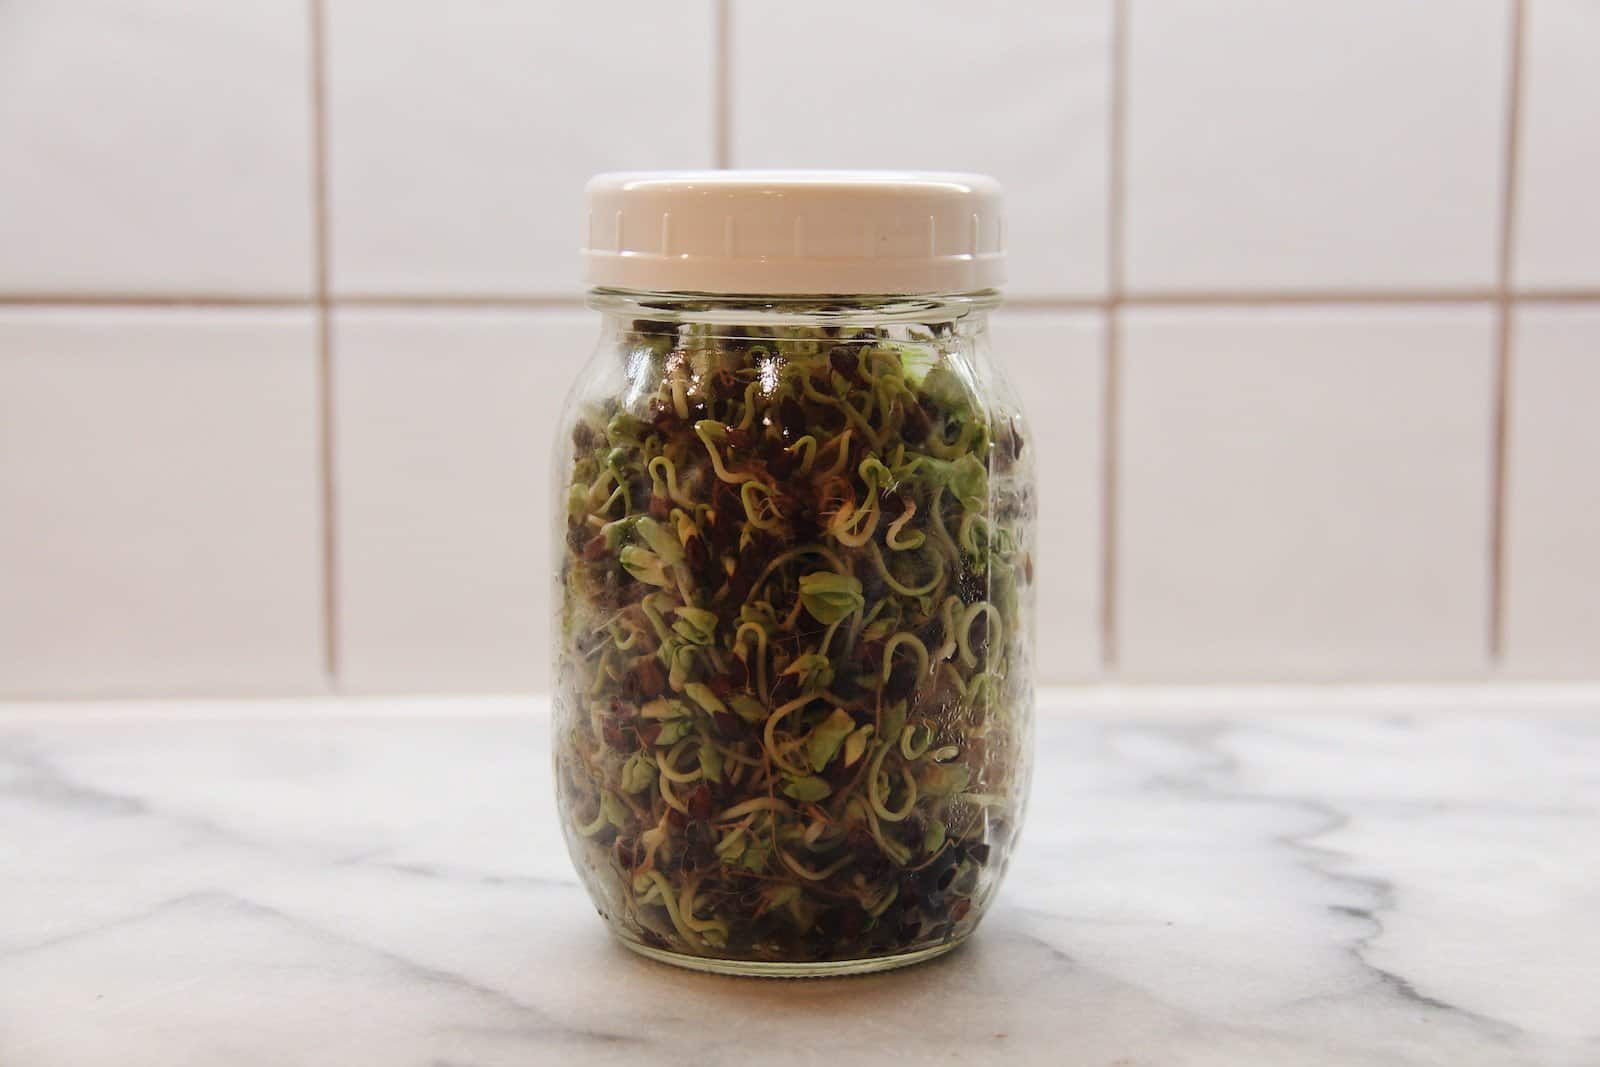 Buckwheat sprouts growing in a mason jar on a kitchen countertop